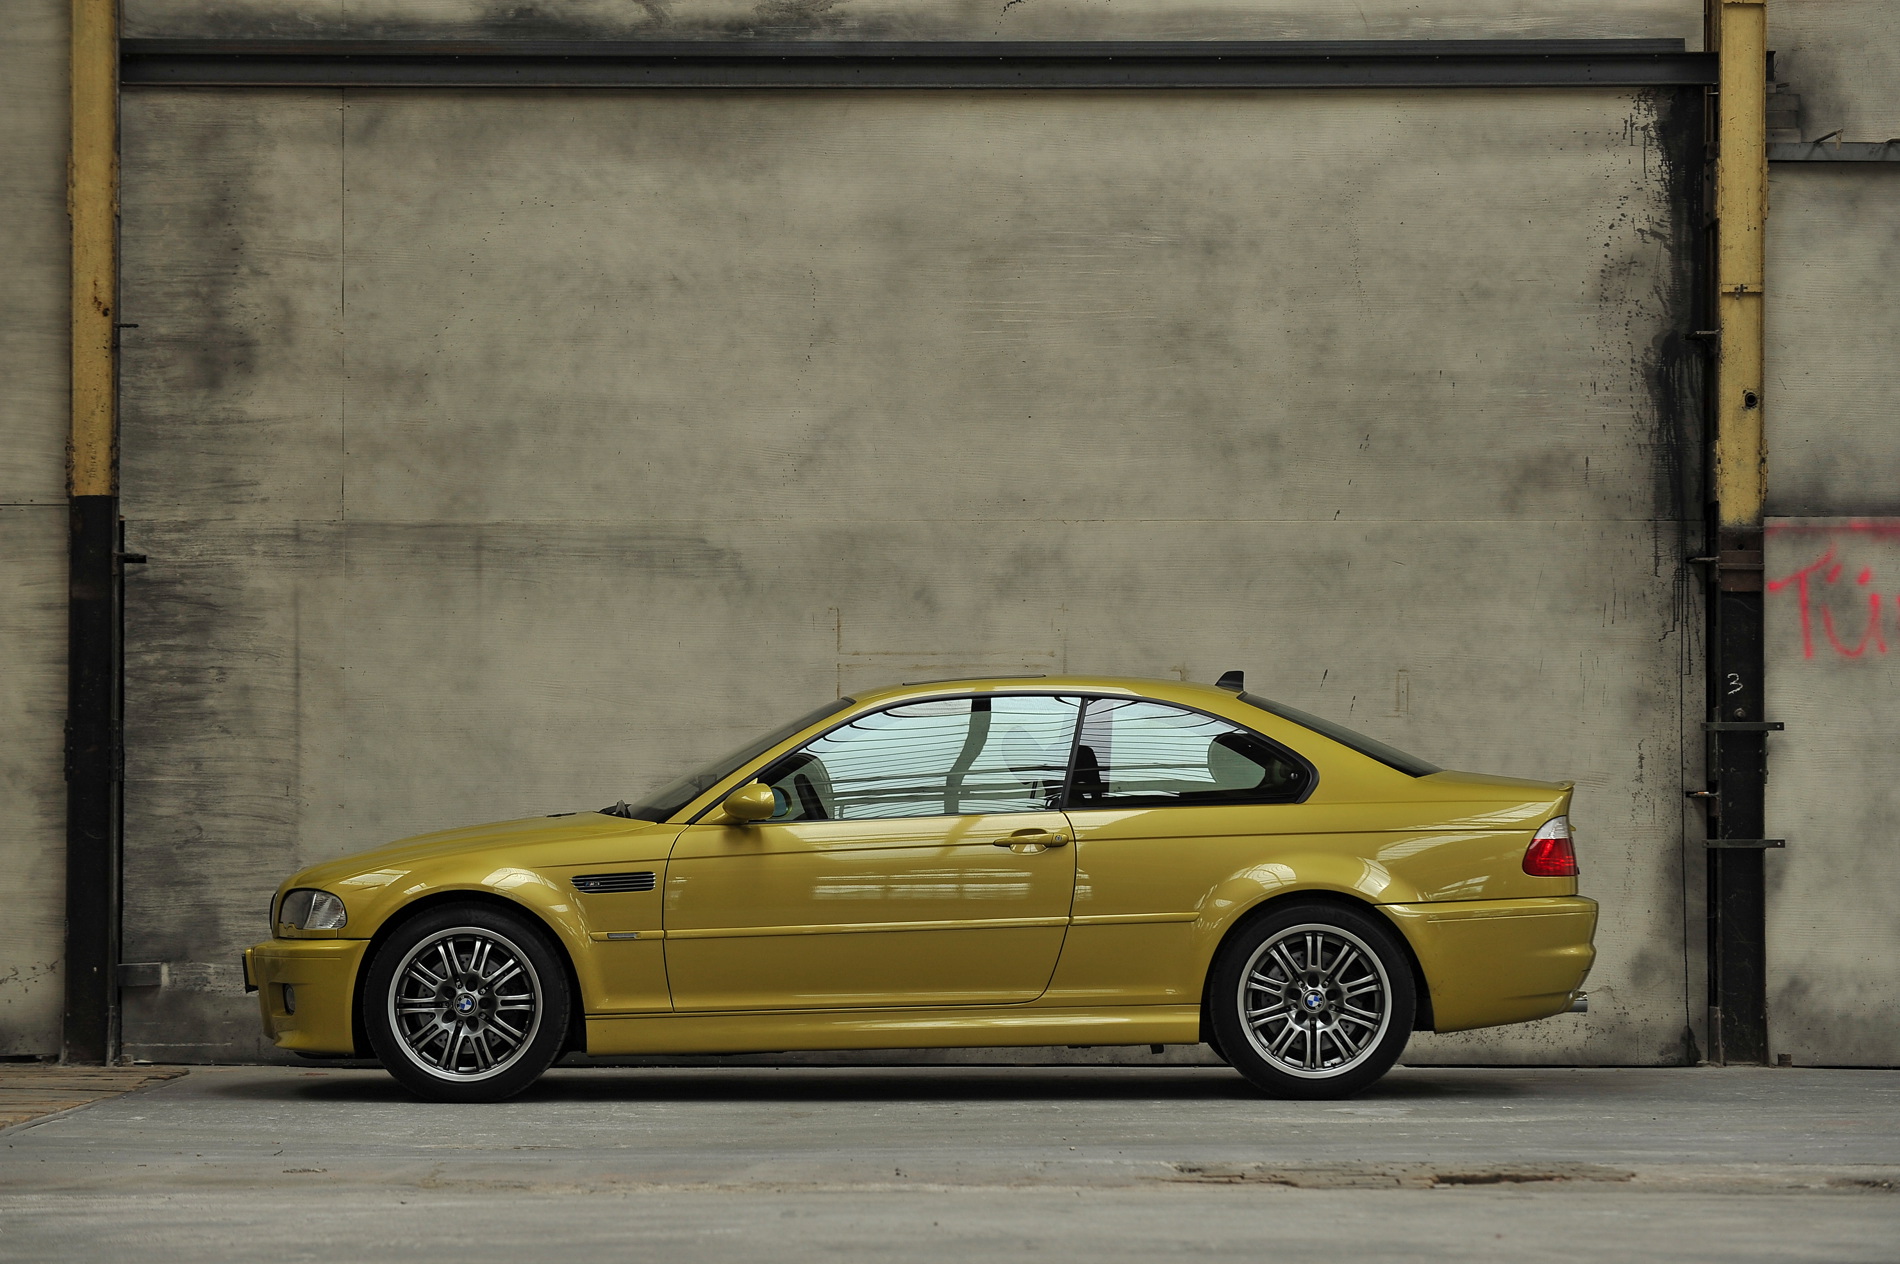 This Is The World's Only V10-Powered BMW E46 M3 With A DCT